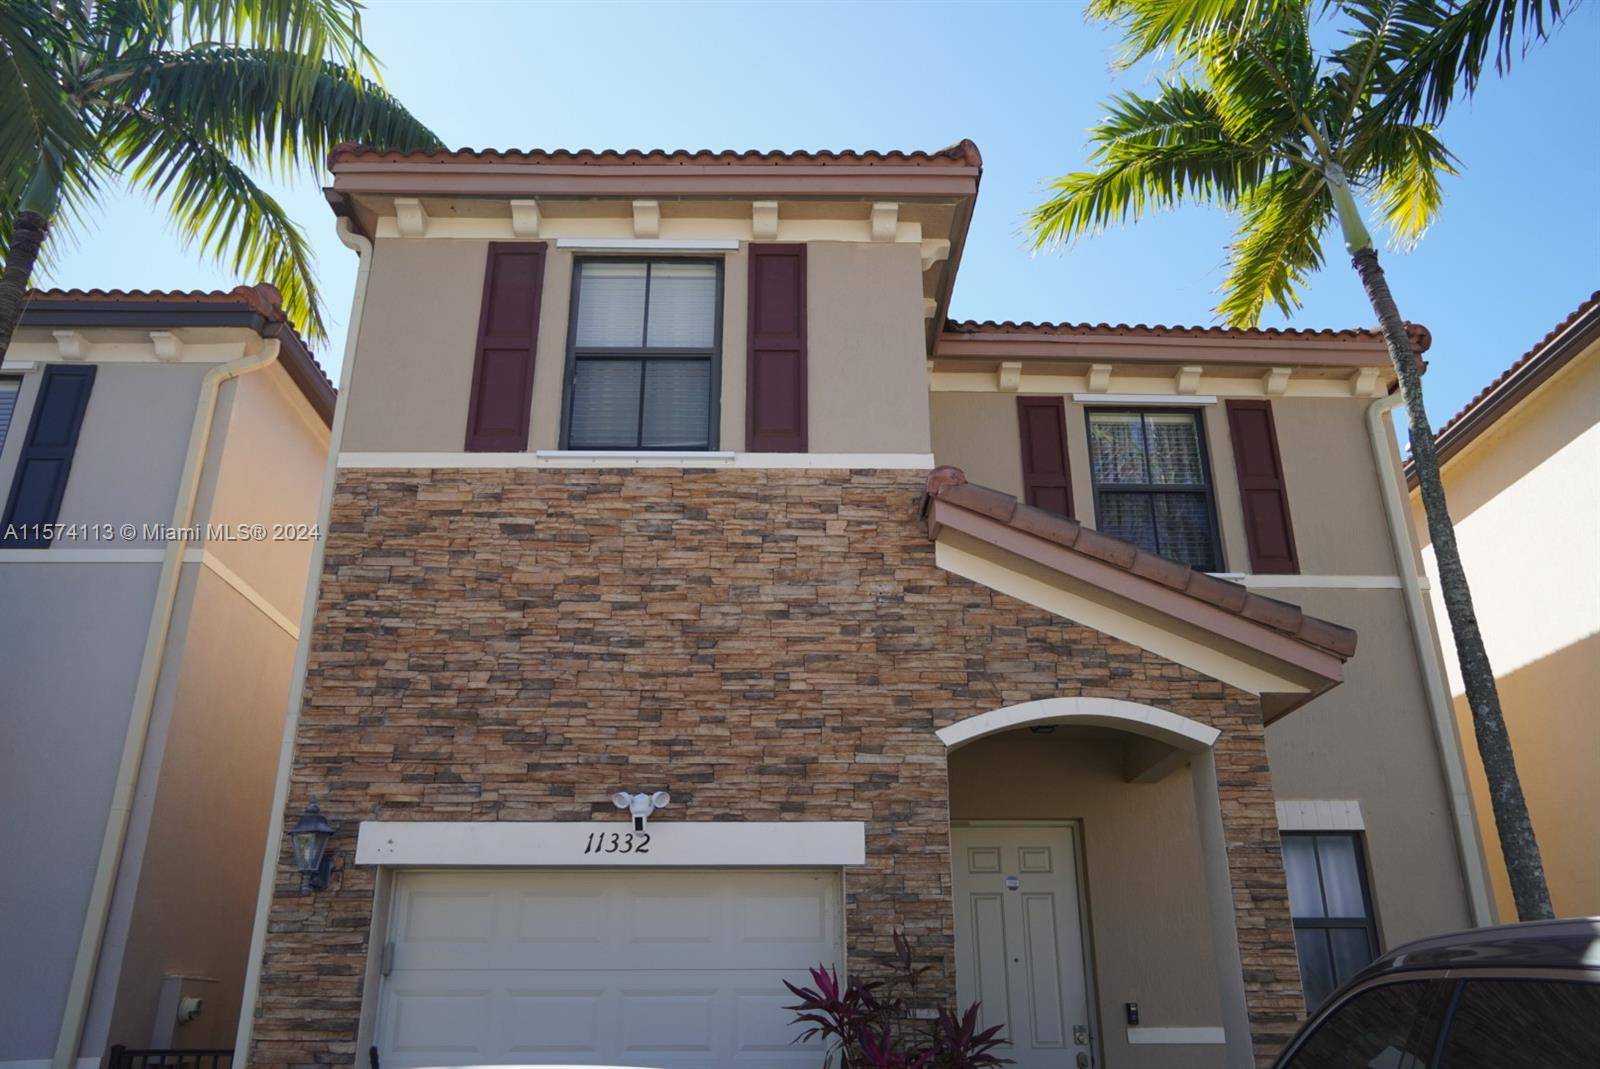 Great 3 2. 5 Coach Home townhouse in great condition.